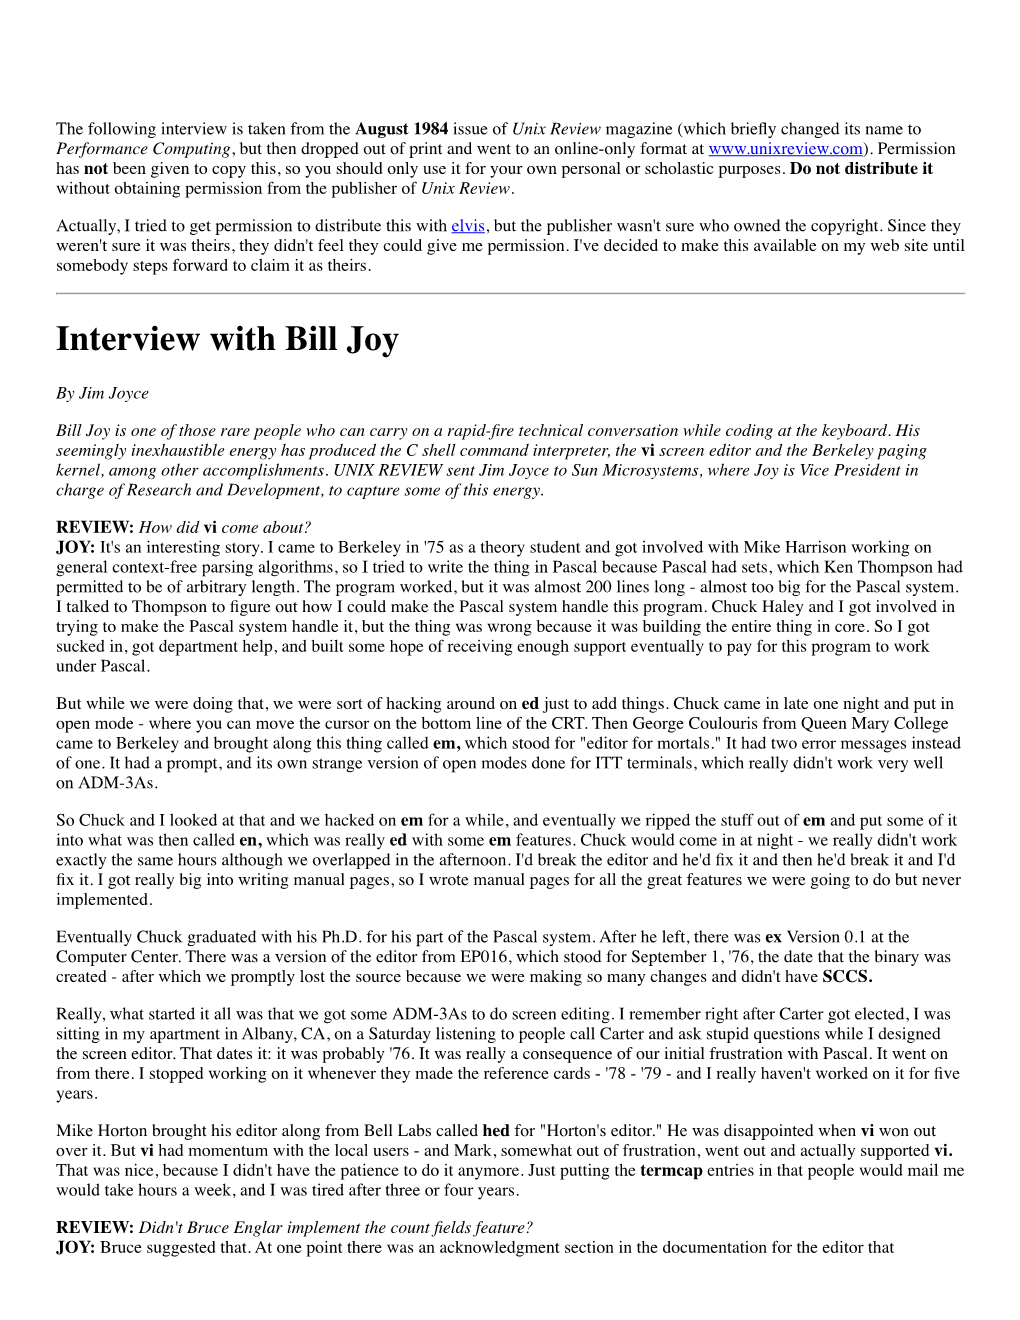 Interview with Bill Joy